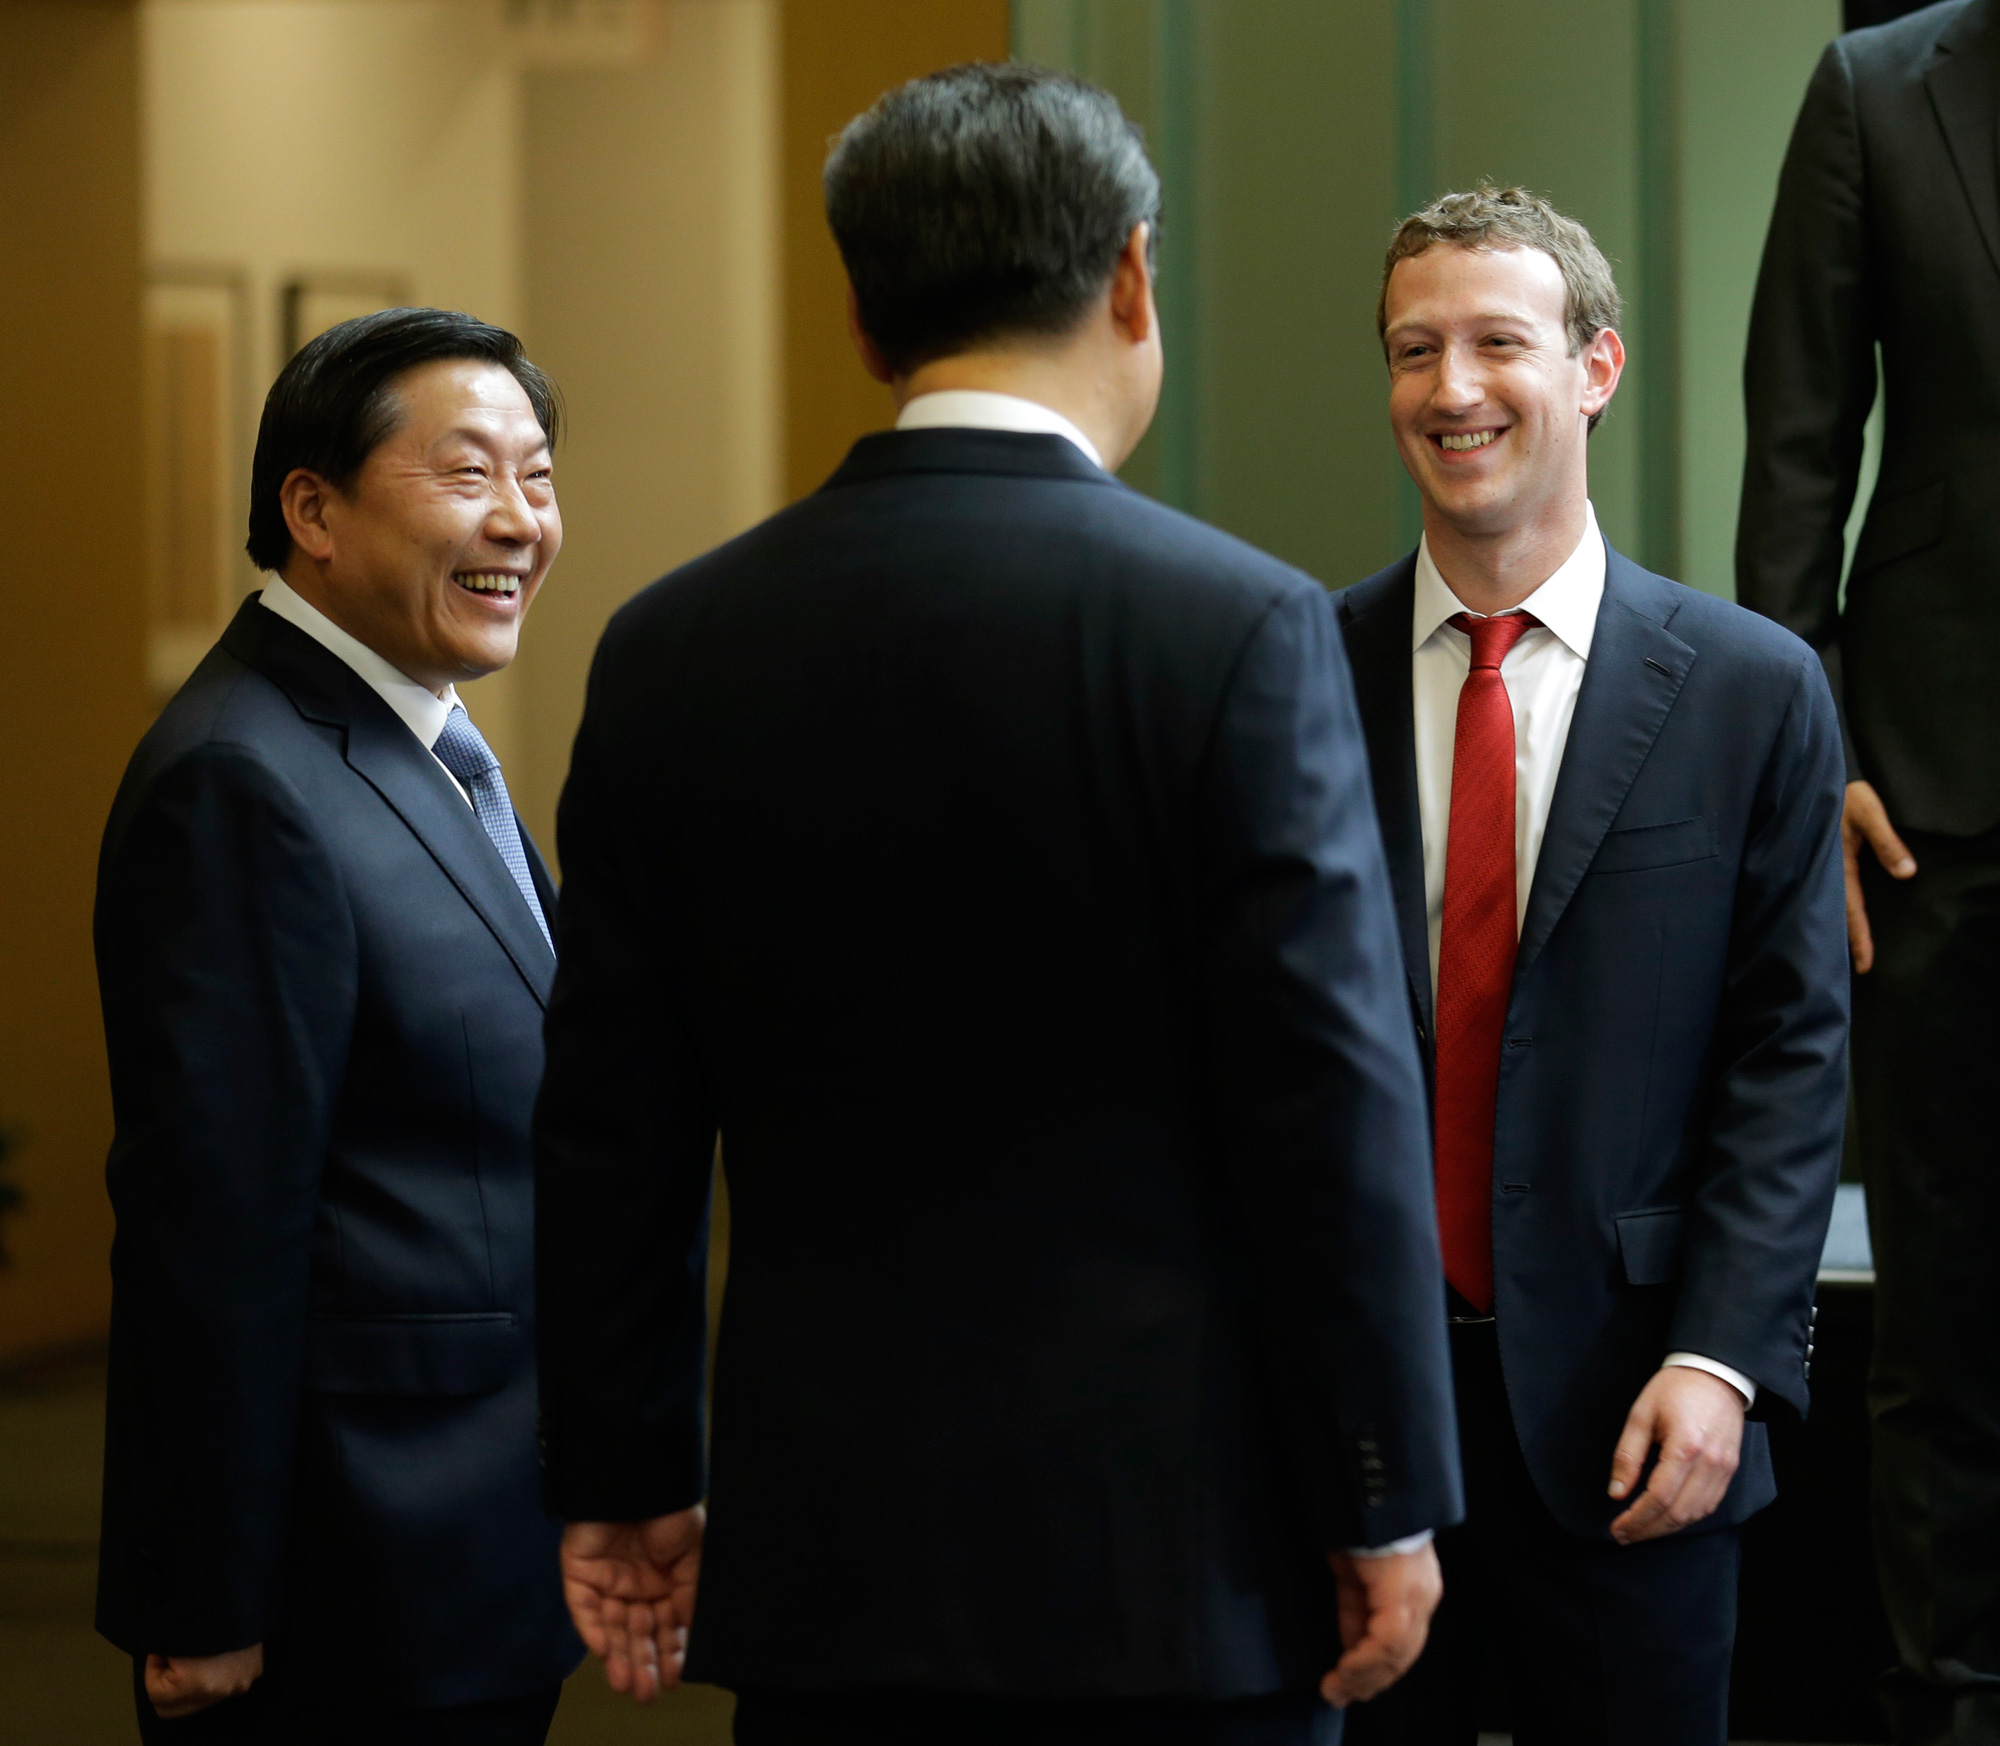 Lu Wei, China's Internet czar (left), speaks with Facebook CEO Mark Zuckerberg and Chinese president Xi Jinping at a meeting in 2015.